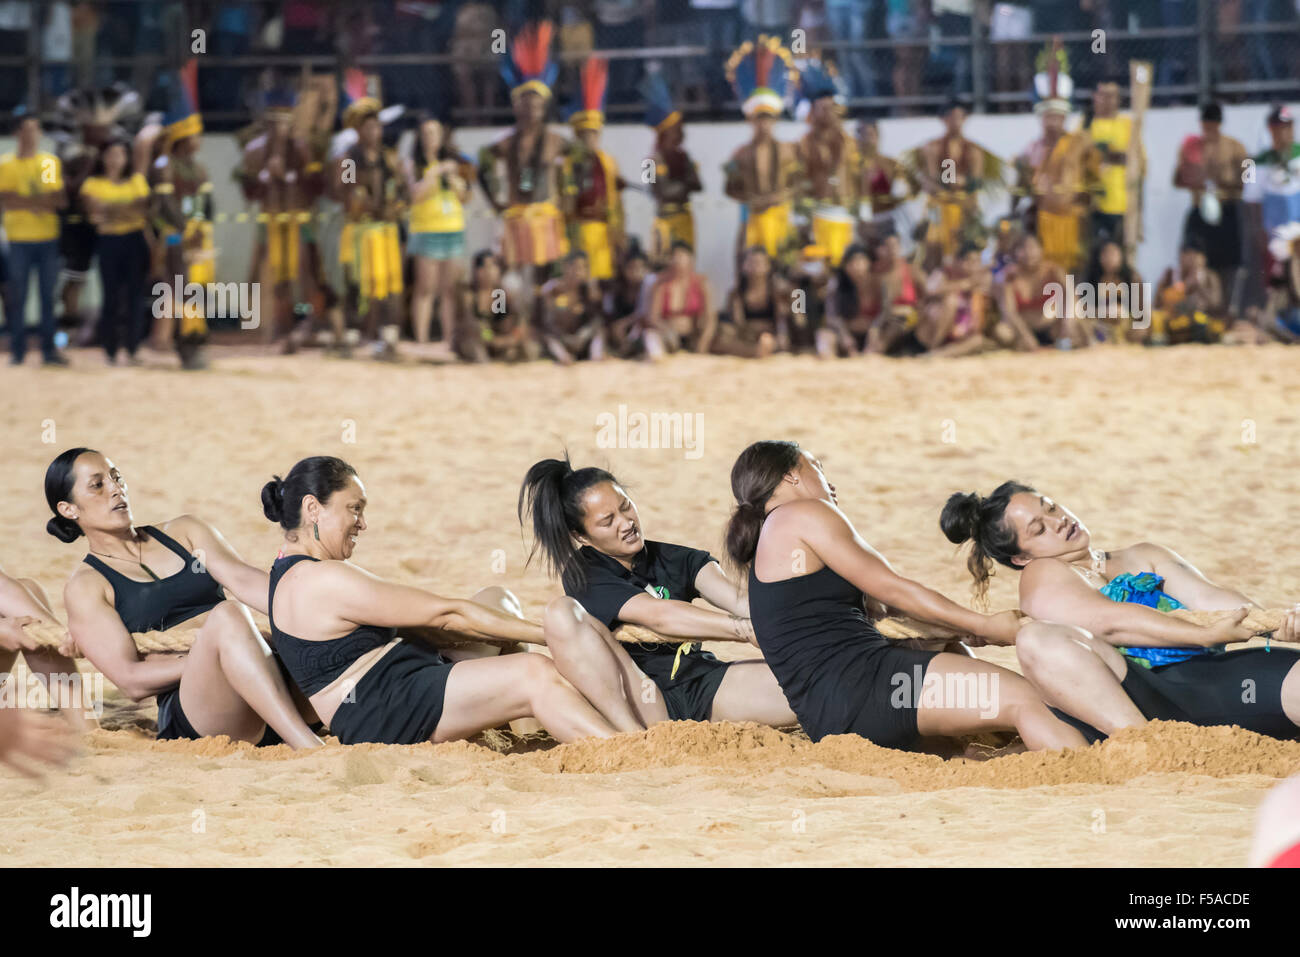 Palmas, Tocantins State, Brazil. 29th October, 2015. The Maori women's team strain on the rope during the tug of war at the International Indigenous Games, in the city of Palmas, Tocantins State, Brazil. Credit:  Sue Cunningham Photographic/Alamy Live News Stock Photo